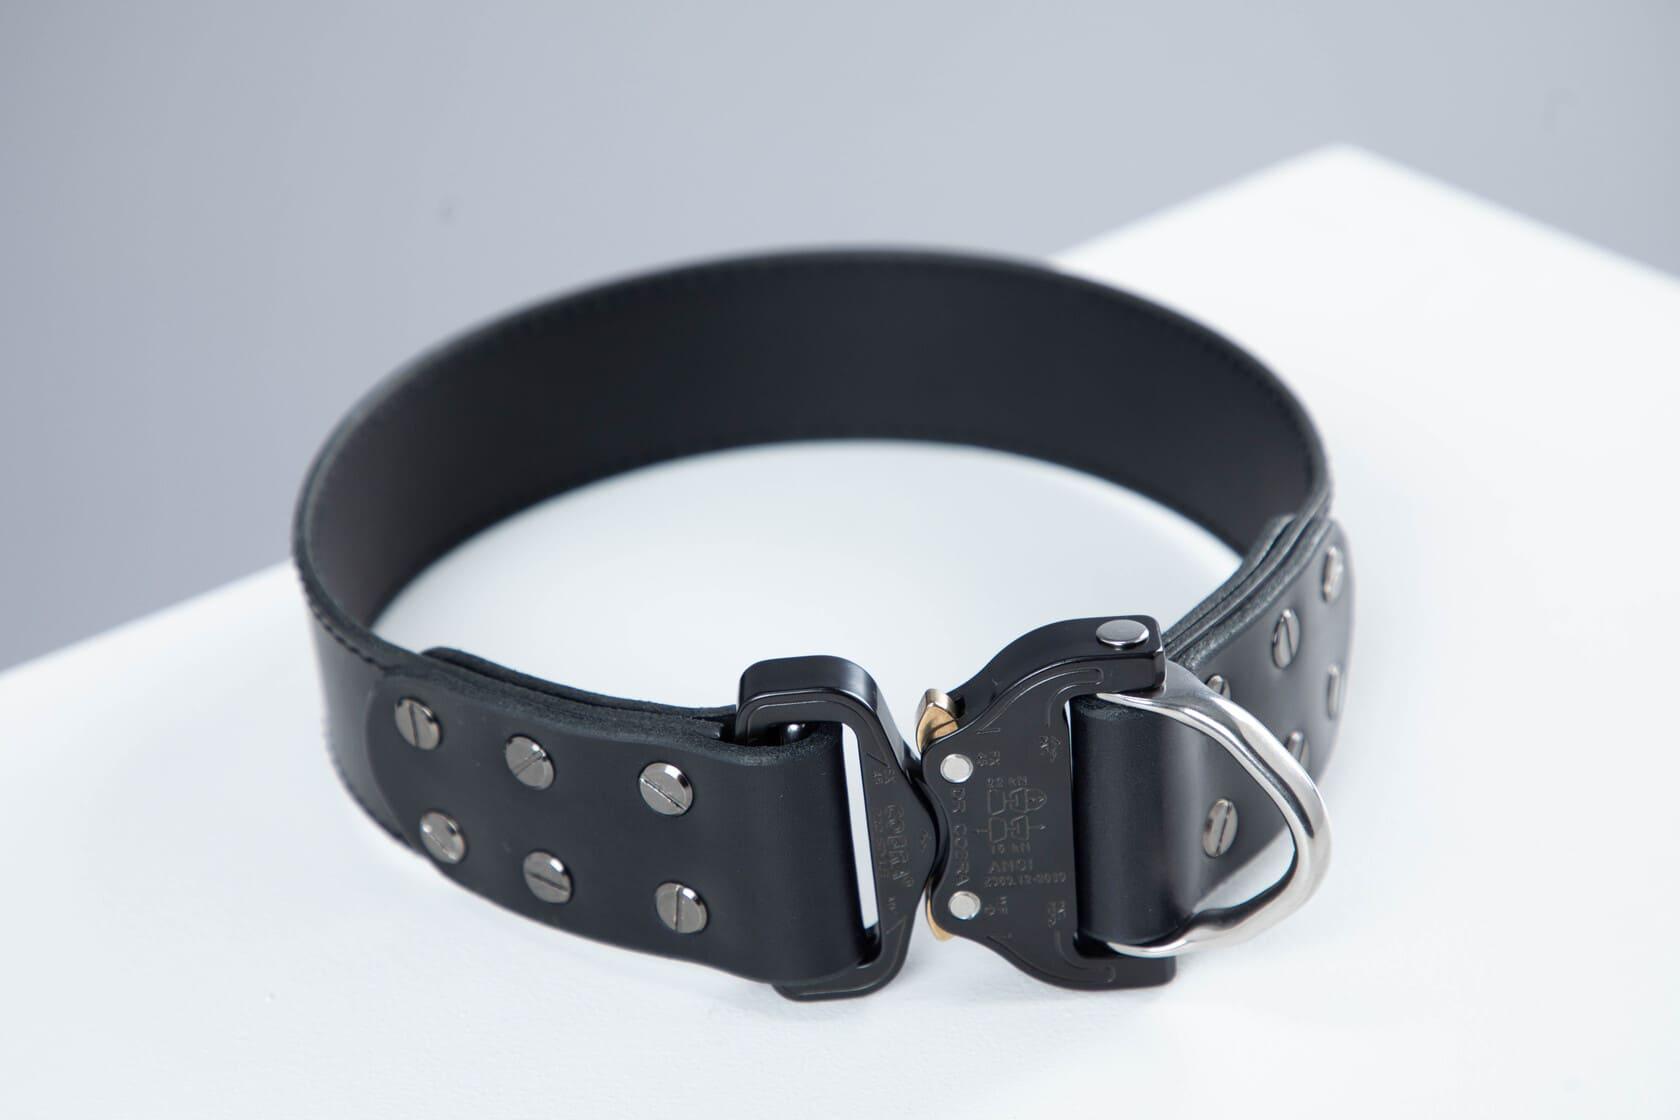 Black leather dog collar with COBRA® buckle - premium dog goods handmade in Europe by My Wild Other